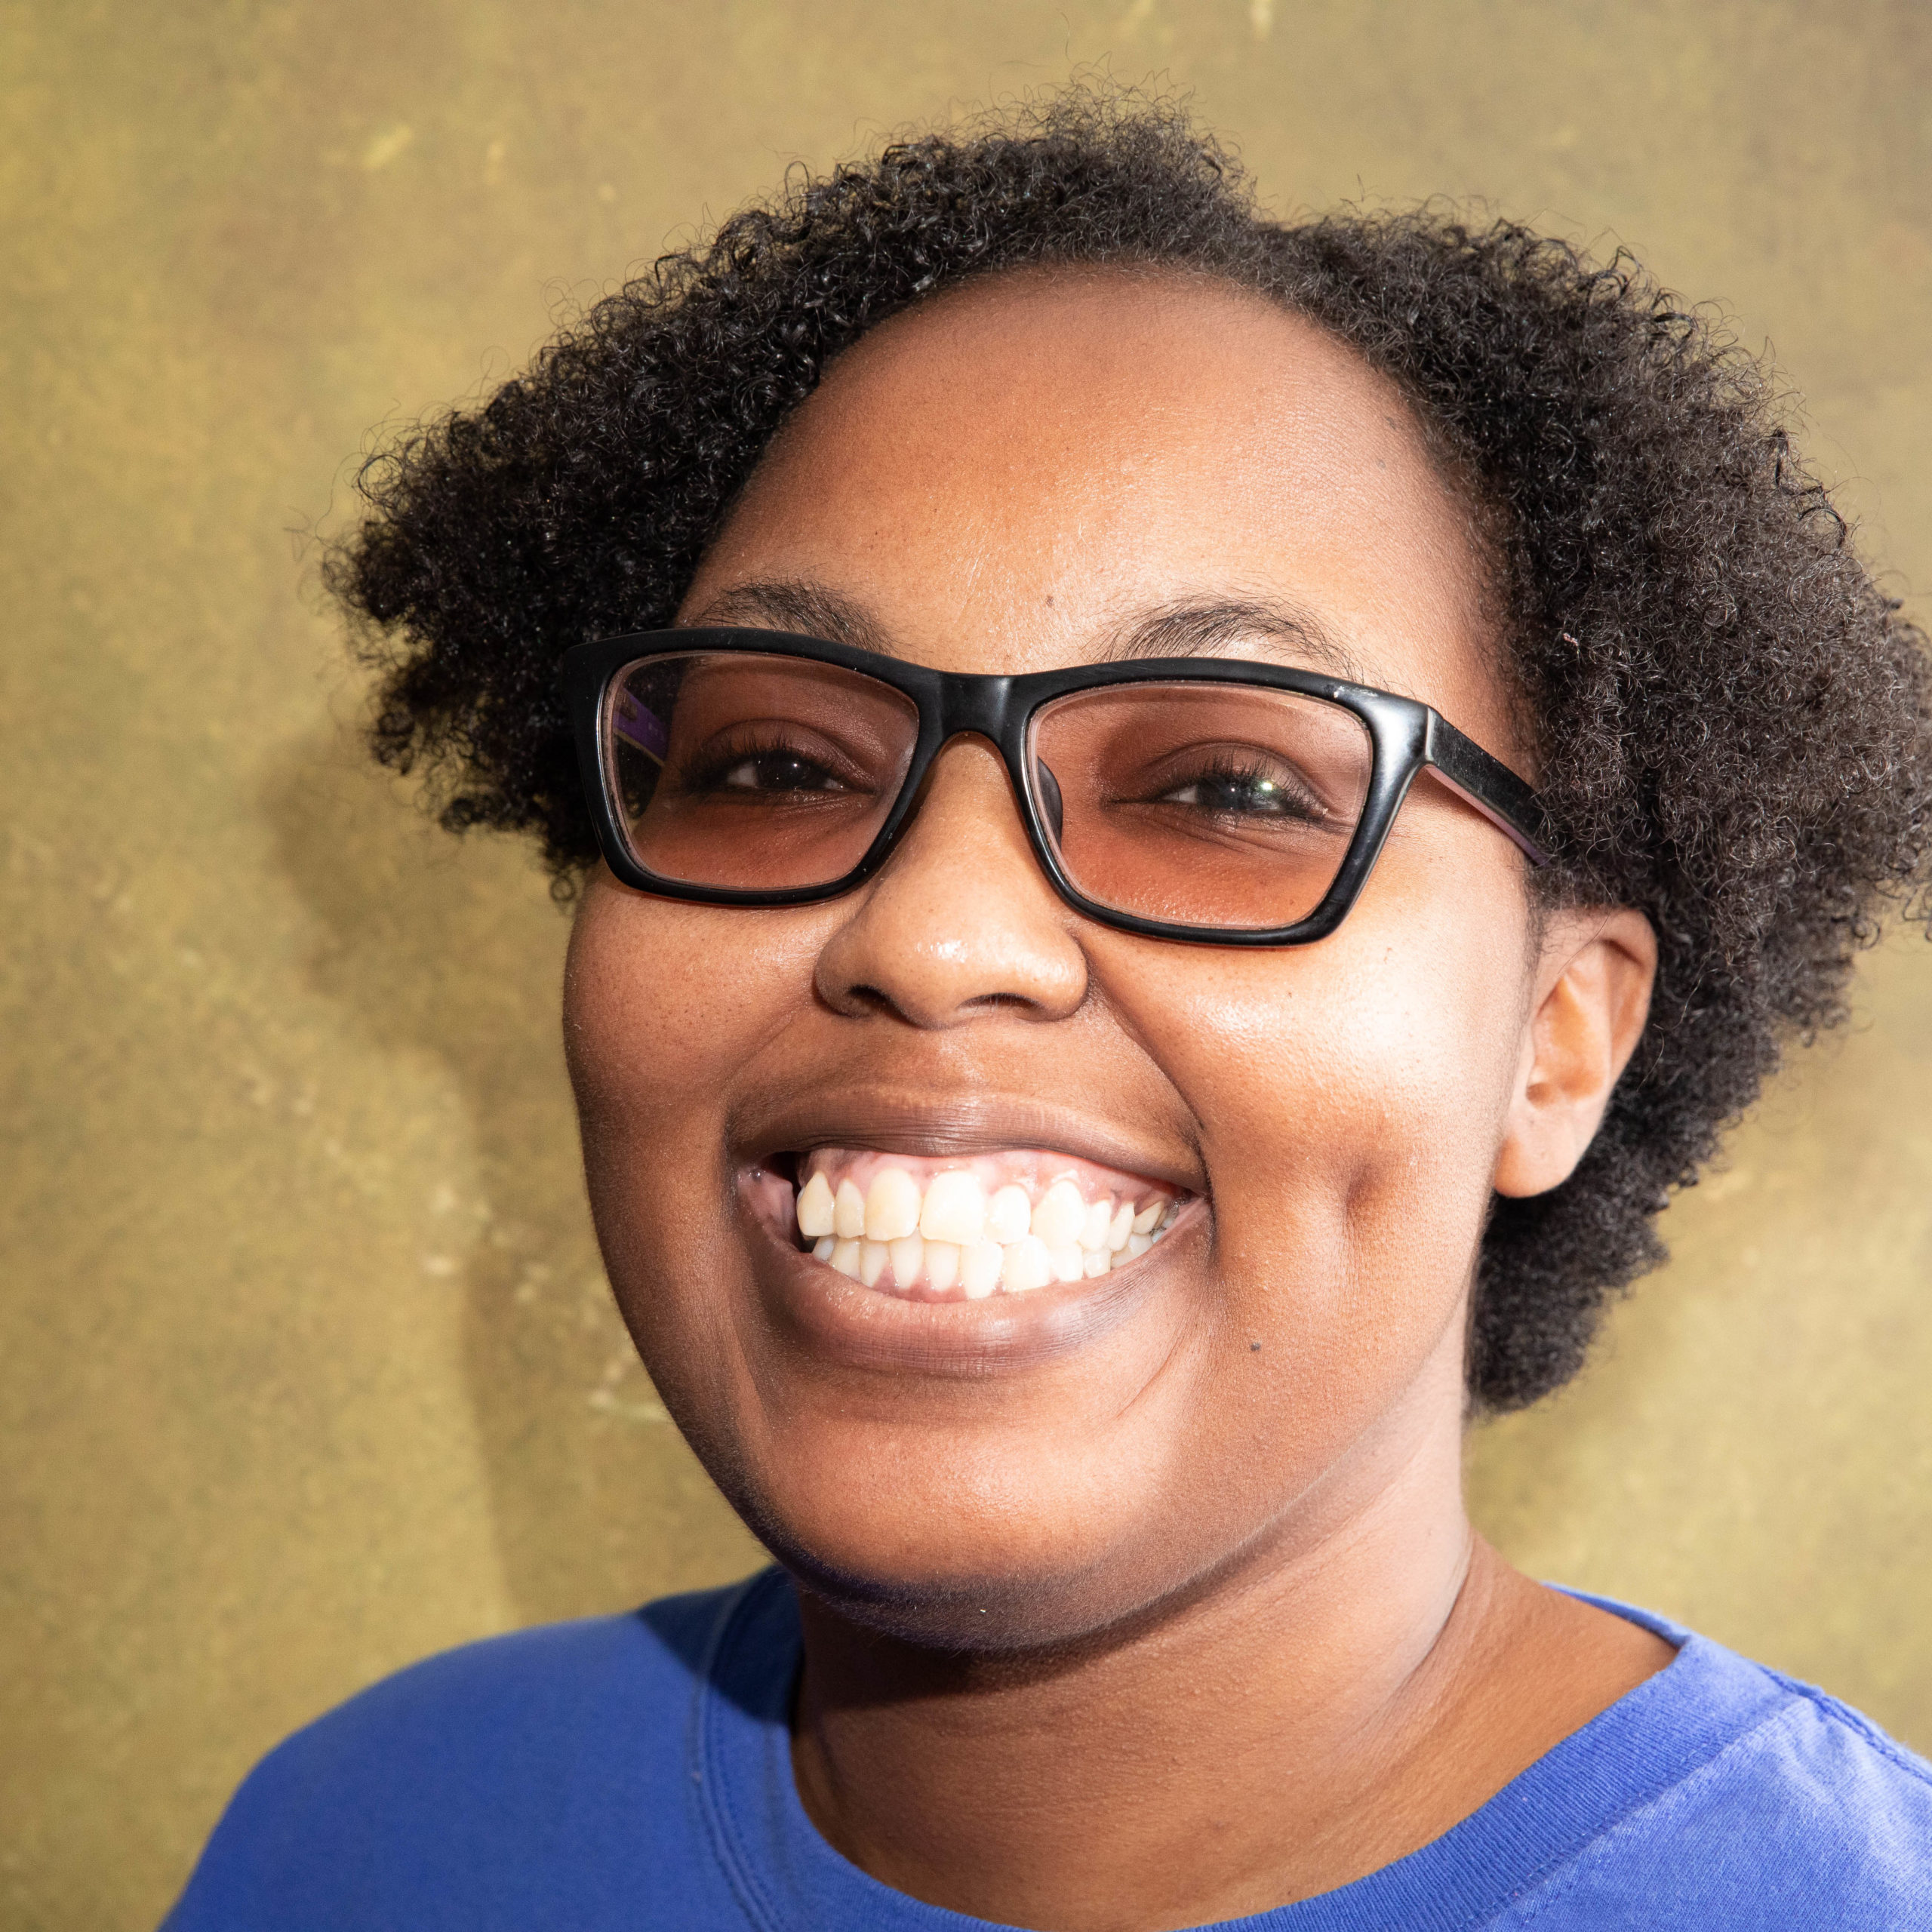 A person smiles wearing glasses and a blue shirt.